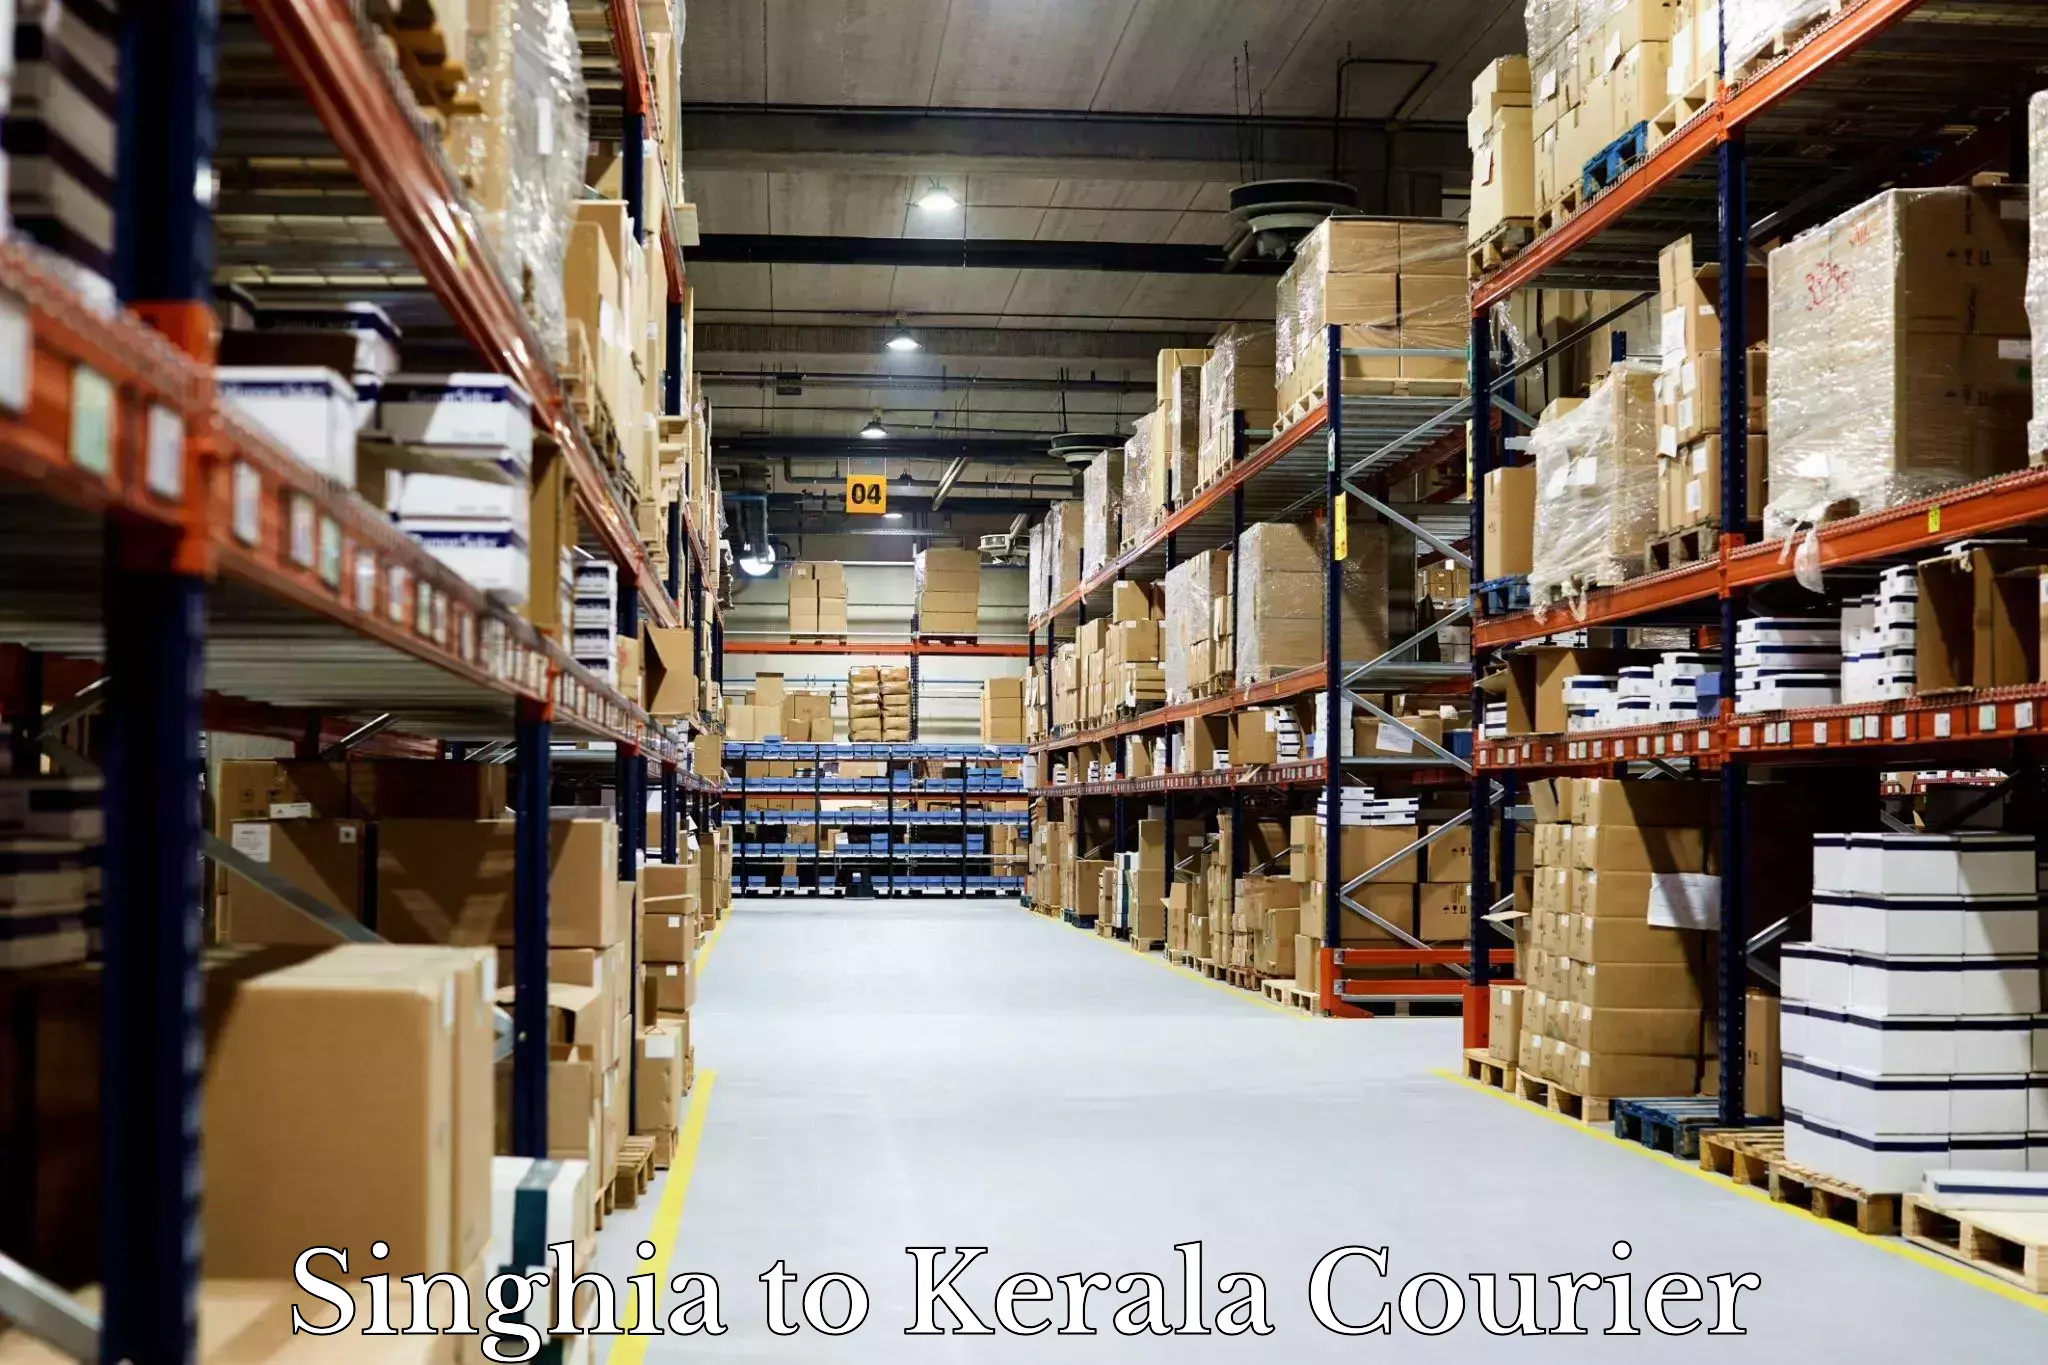 International courier networks Singhia to Kerala